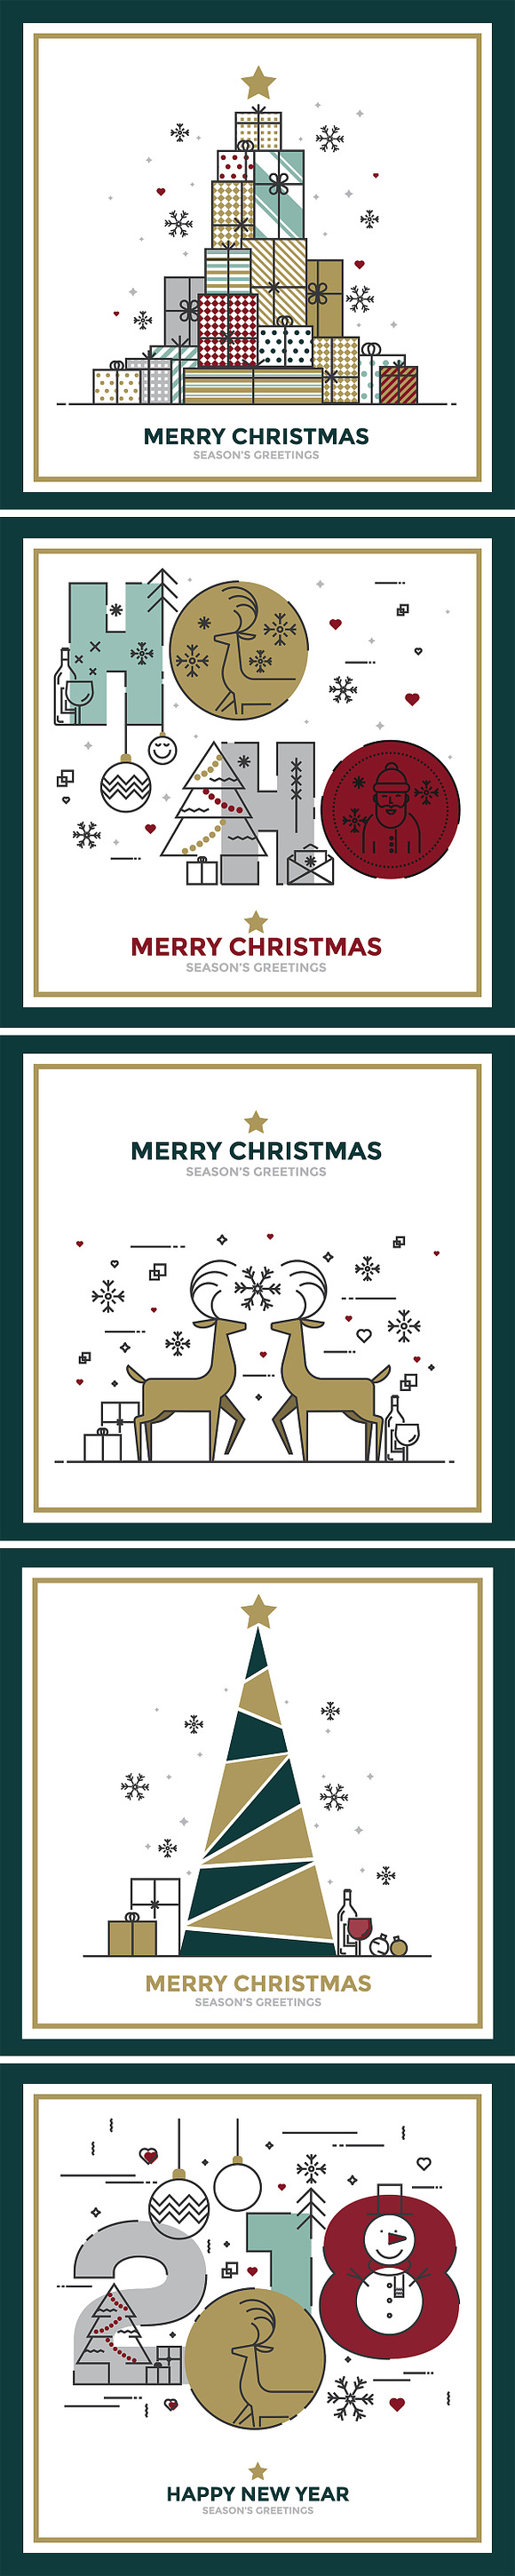 Merry Christmas greeting cards in Illustrations - product preview 1